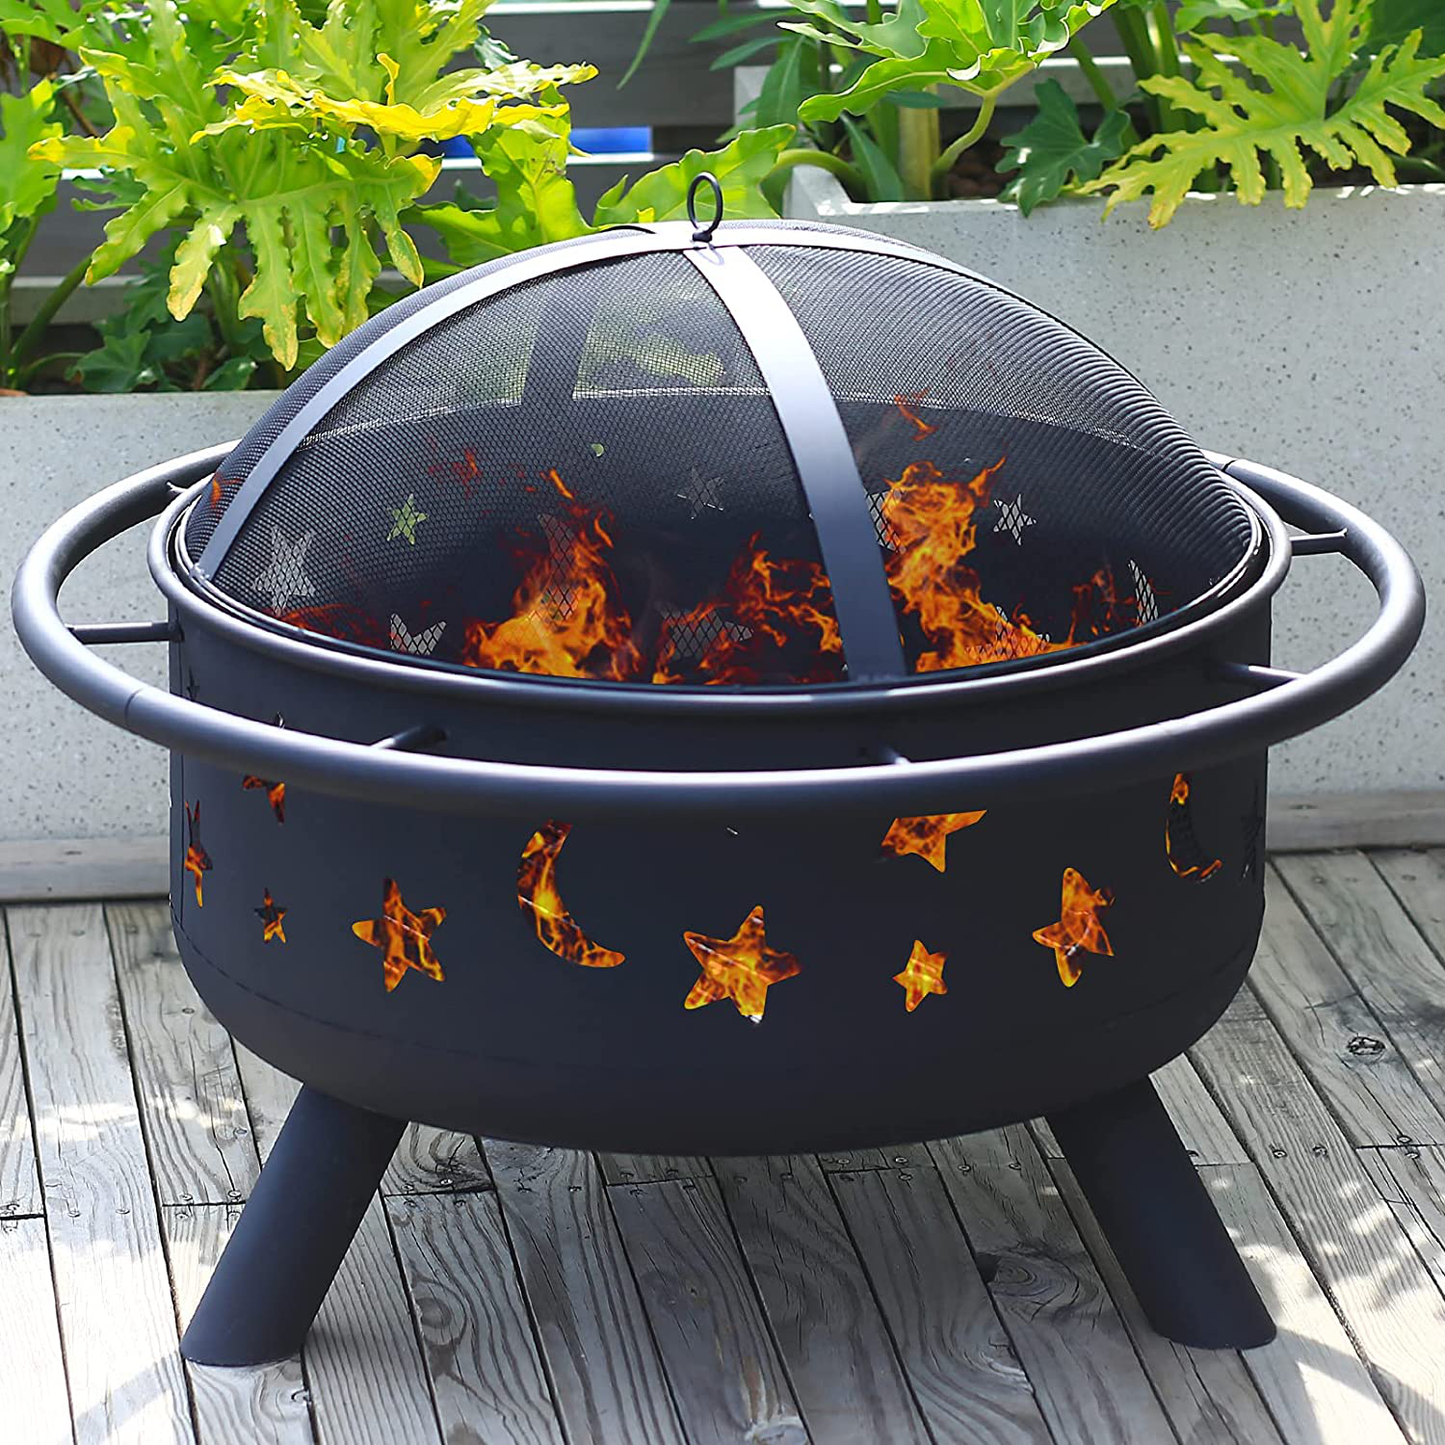 Outdoor Fire Pit Set, Fire Pits for Outside - Includes Screen, Cover and Log Poker, 30 inch Round Star and Moon Fire Pit by CGVOVOT